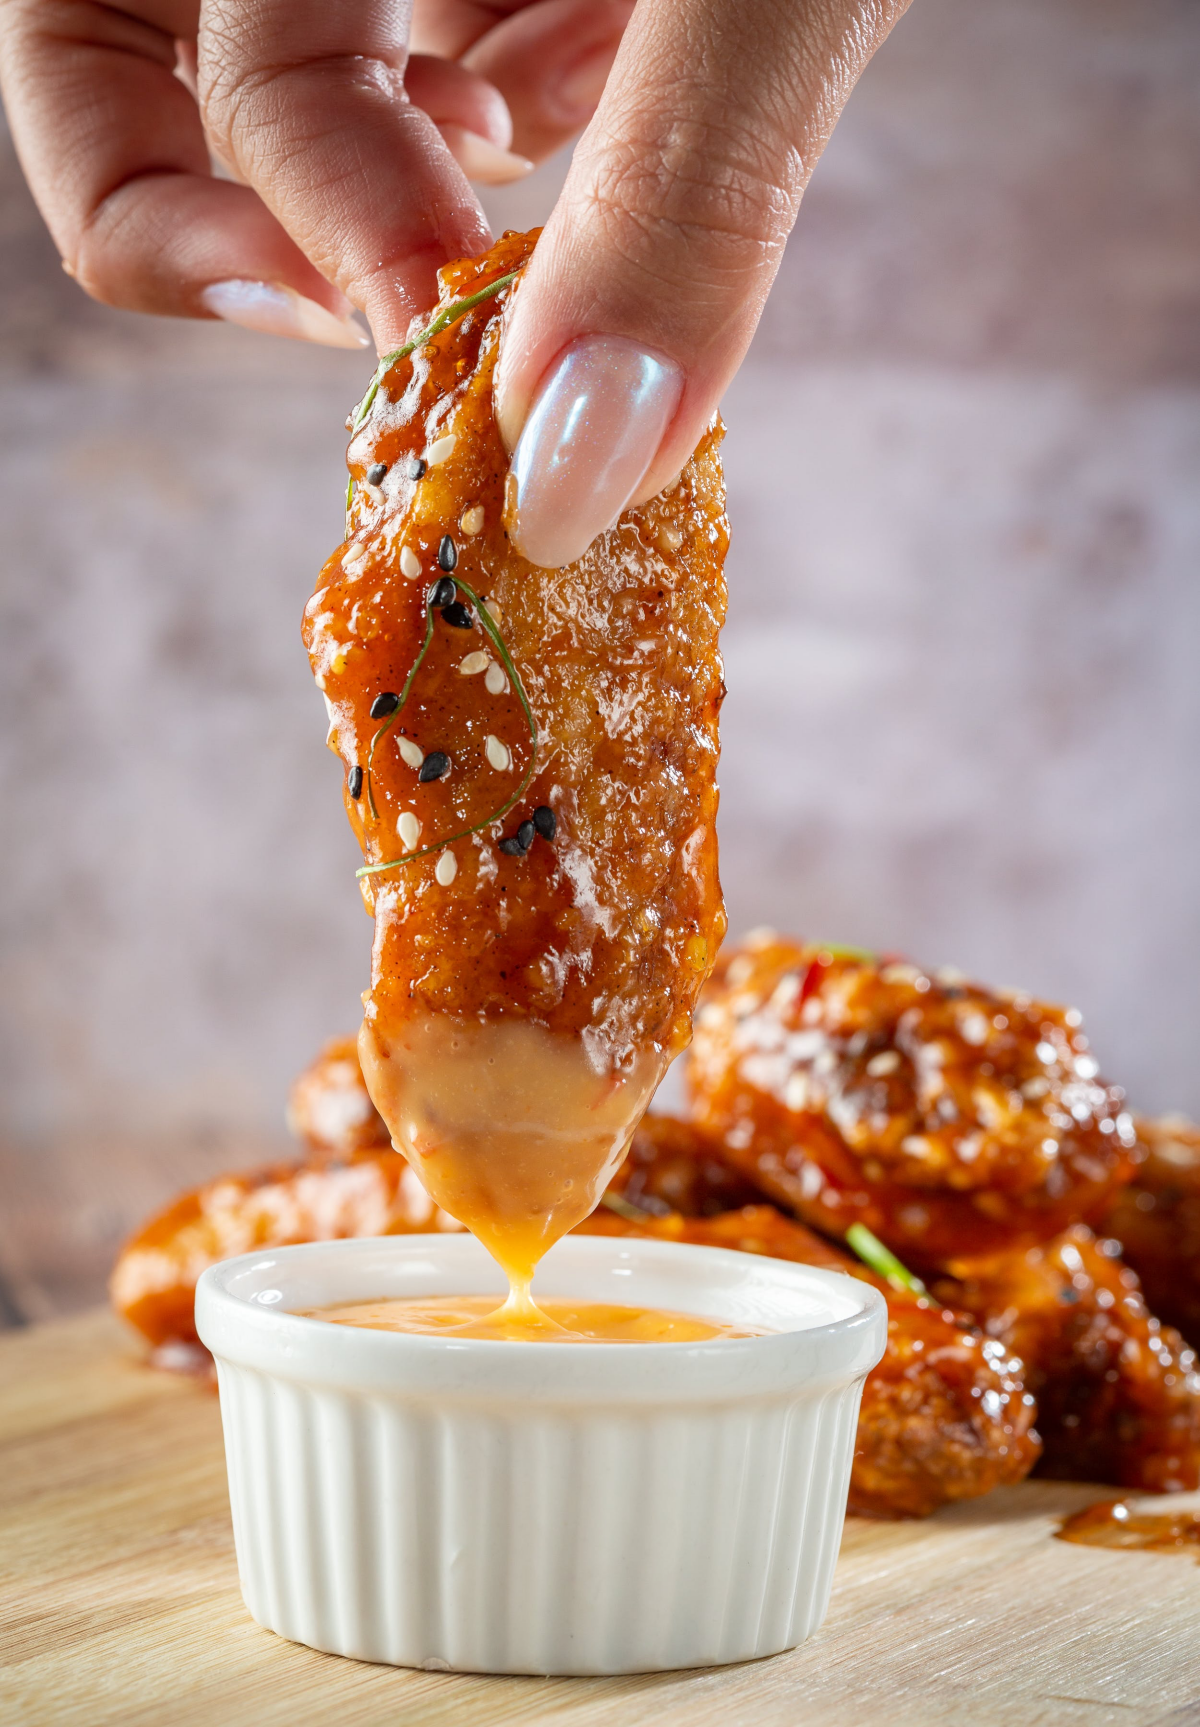 dipping chicken wing in sauce